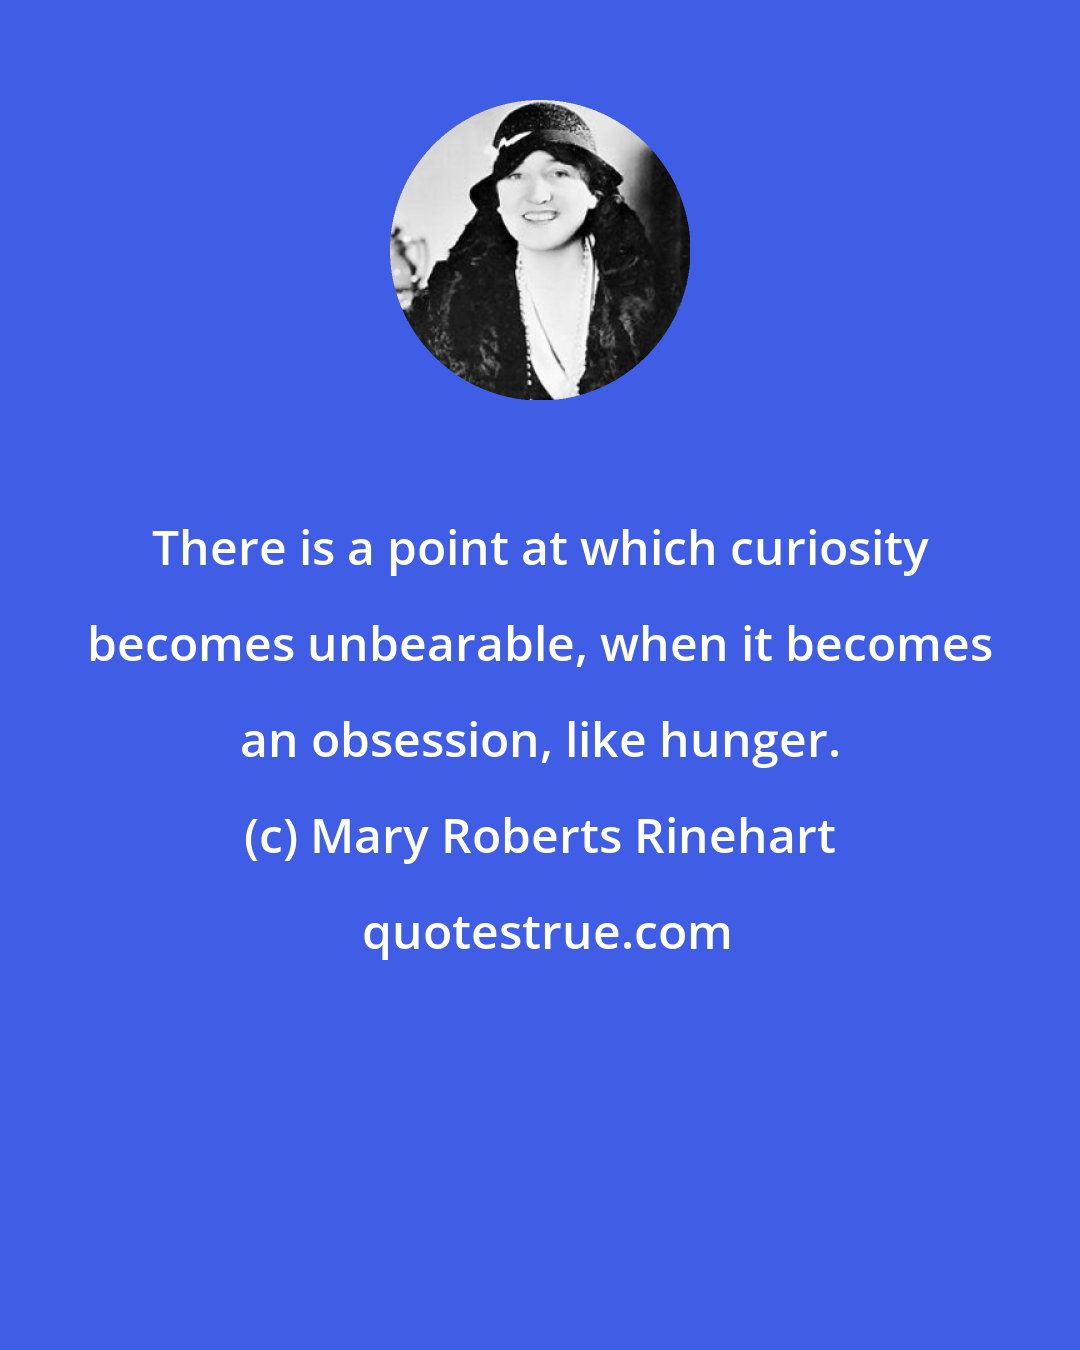 Mary Roberts Rinehart: There is a point at which curiosity becomes unbearable, when it becomes an obsession, like hunger.